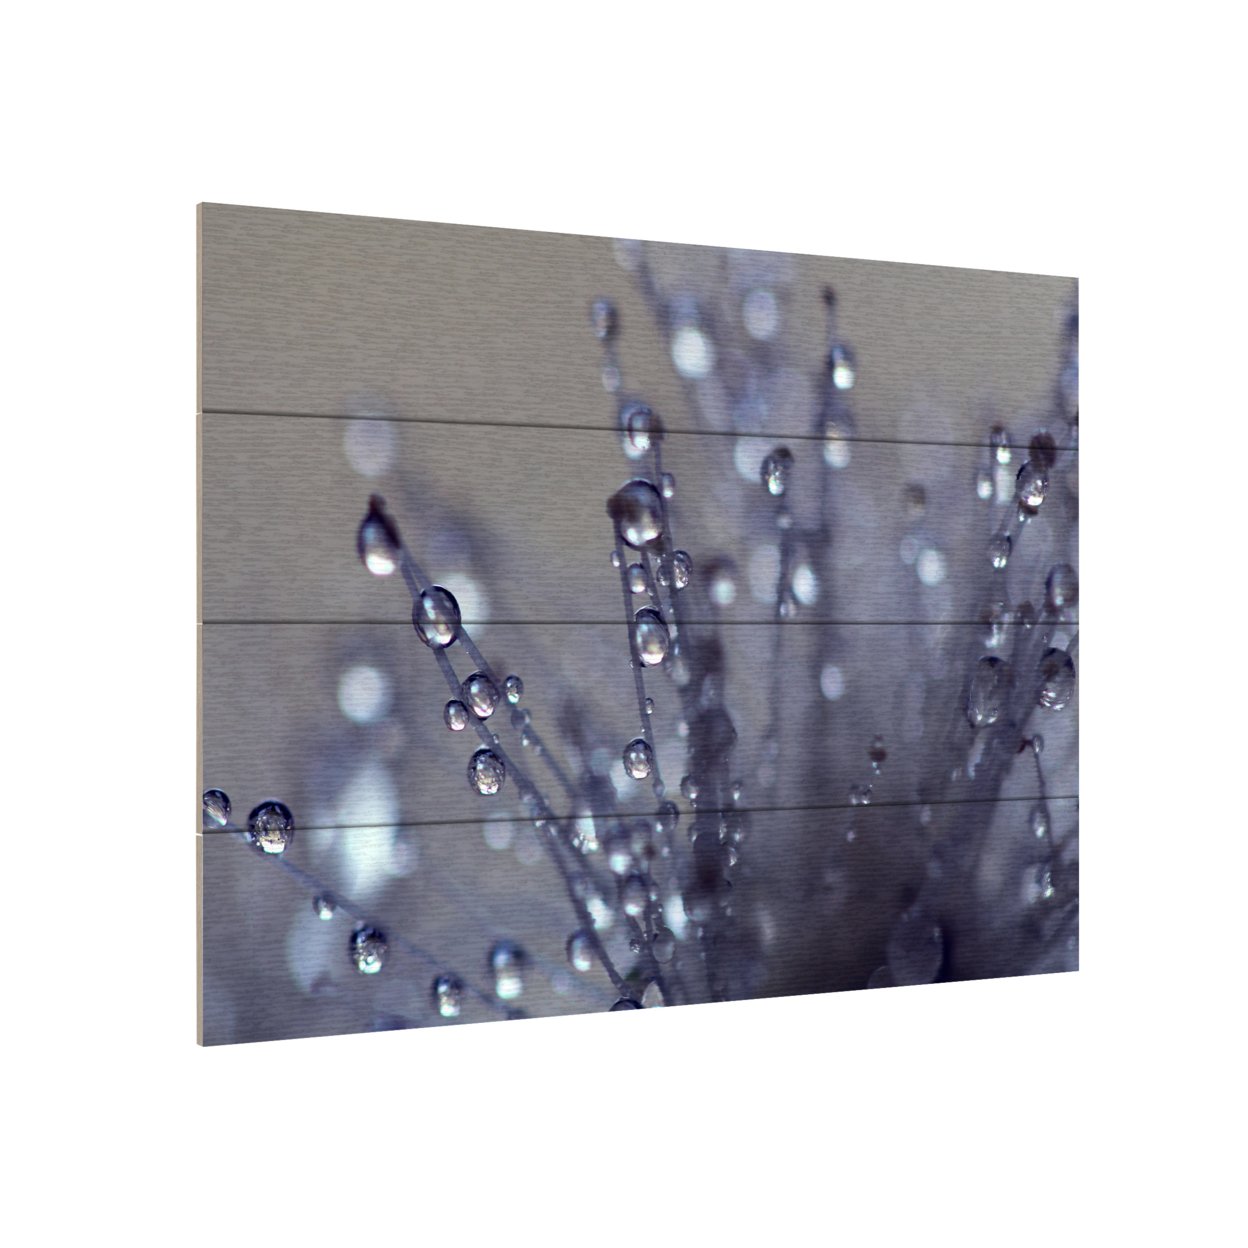 Wall Art 12 X 16 Inches Titled Evening Jewels Ready To Hang Printed On Wooden Planks